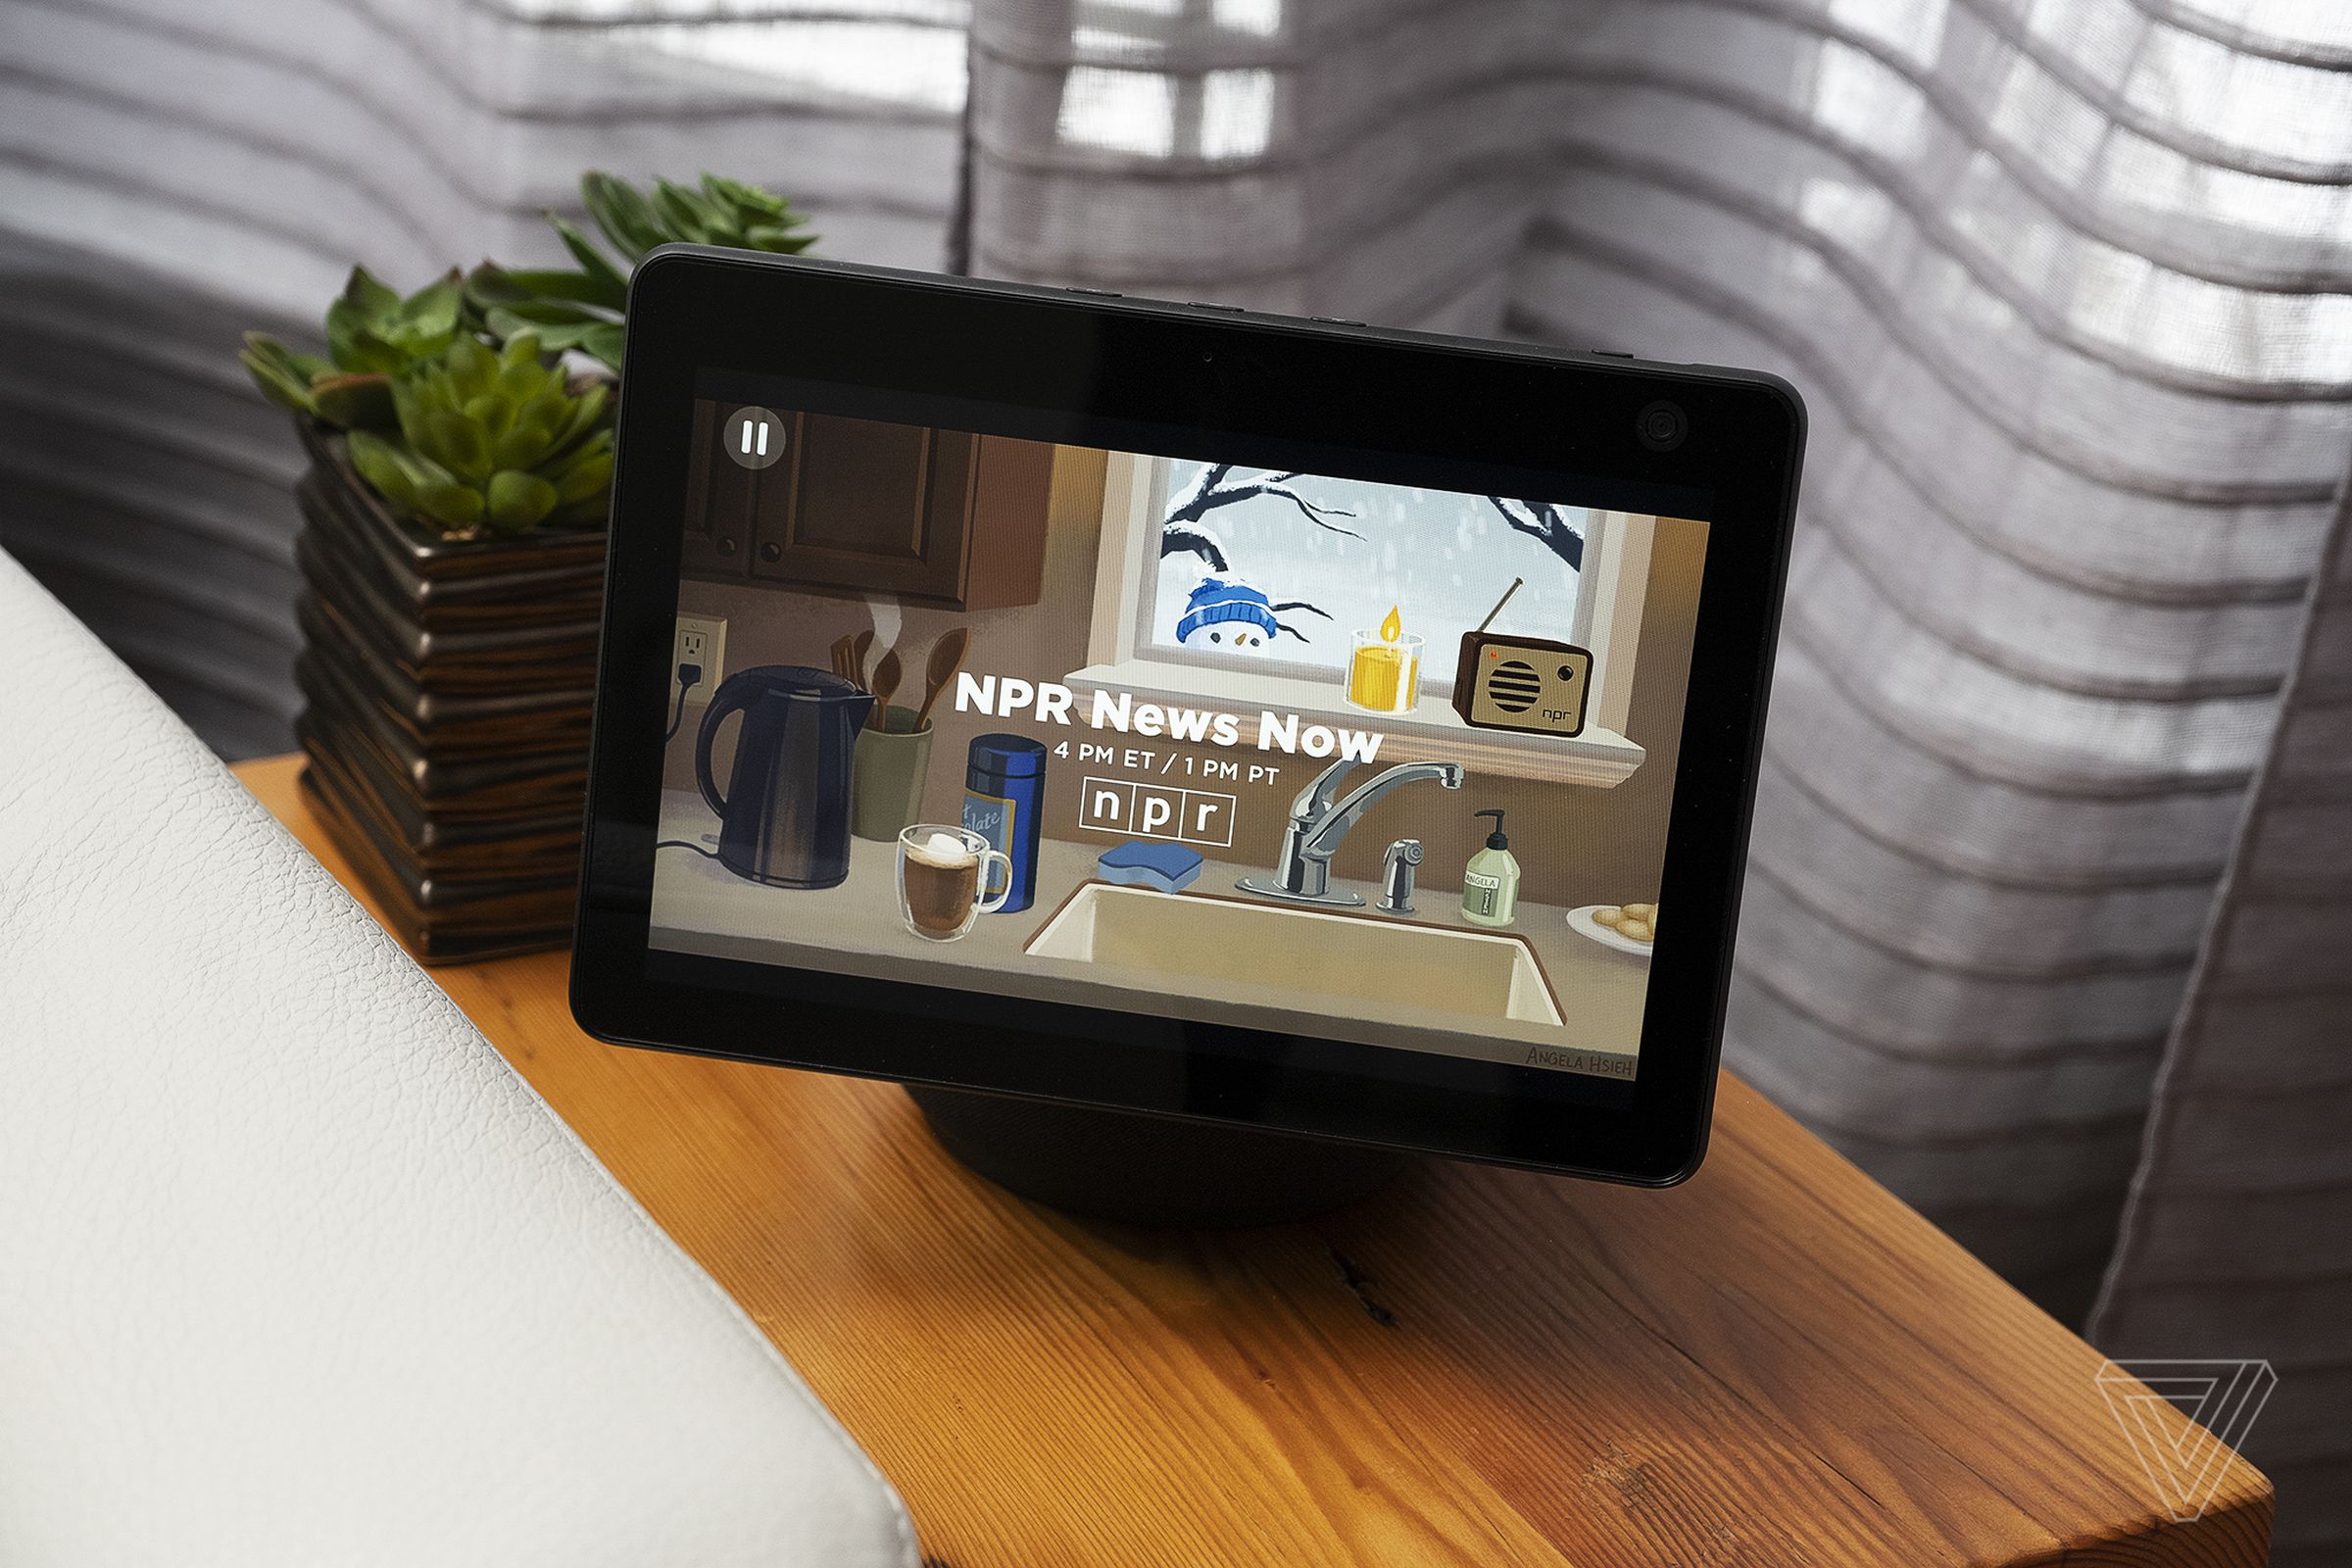 An Echo Show 10 device sitting on a piece of wood furniture beside a couch.